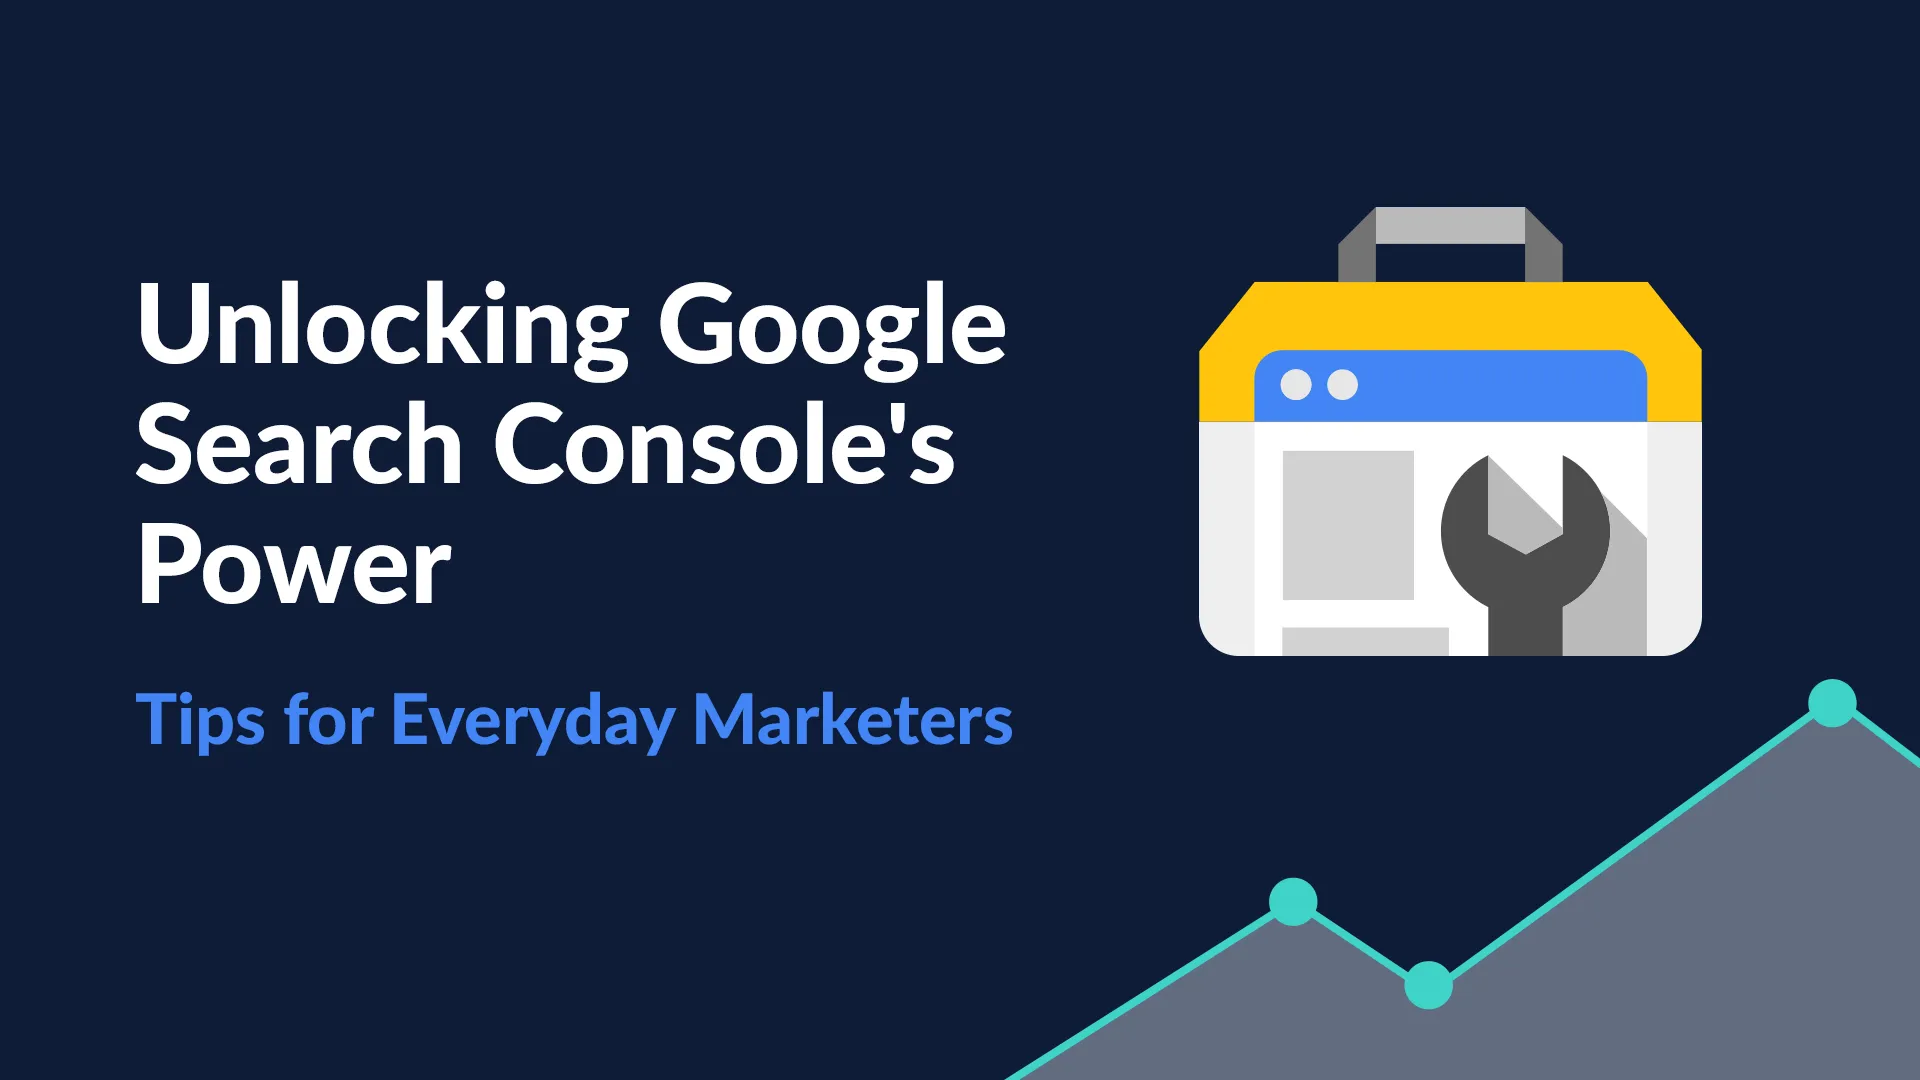 Webinar: Unlocking Google Search Console’s Power – Tips for Everyday Marketers